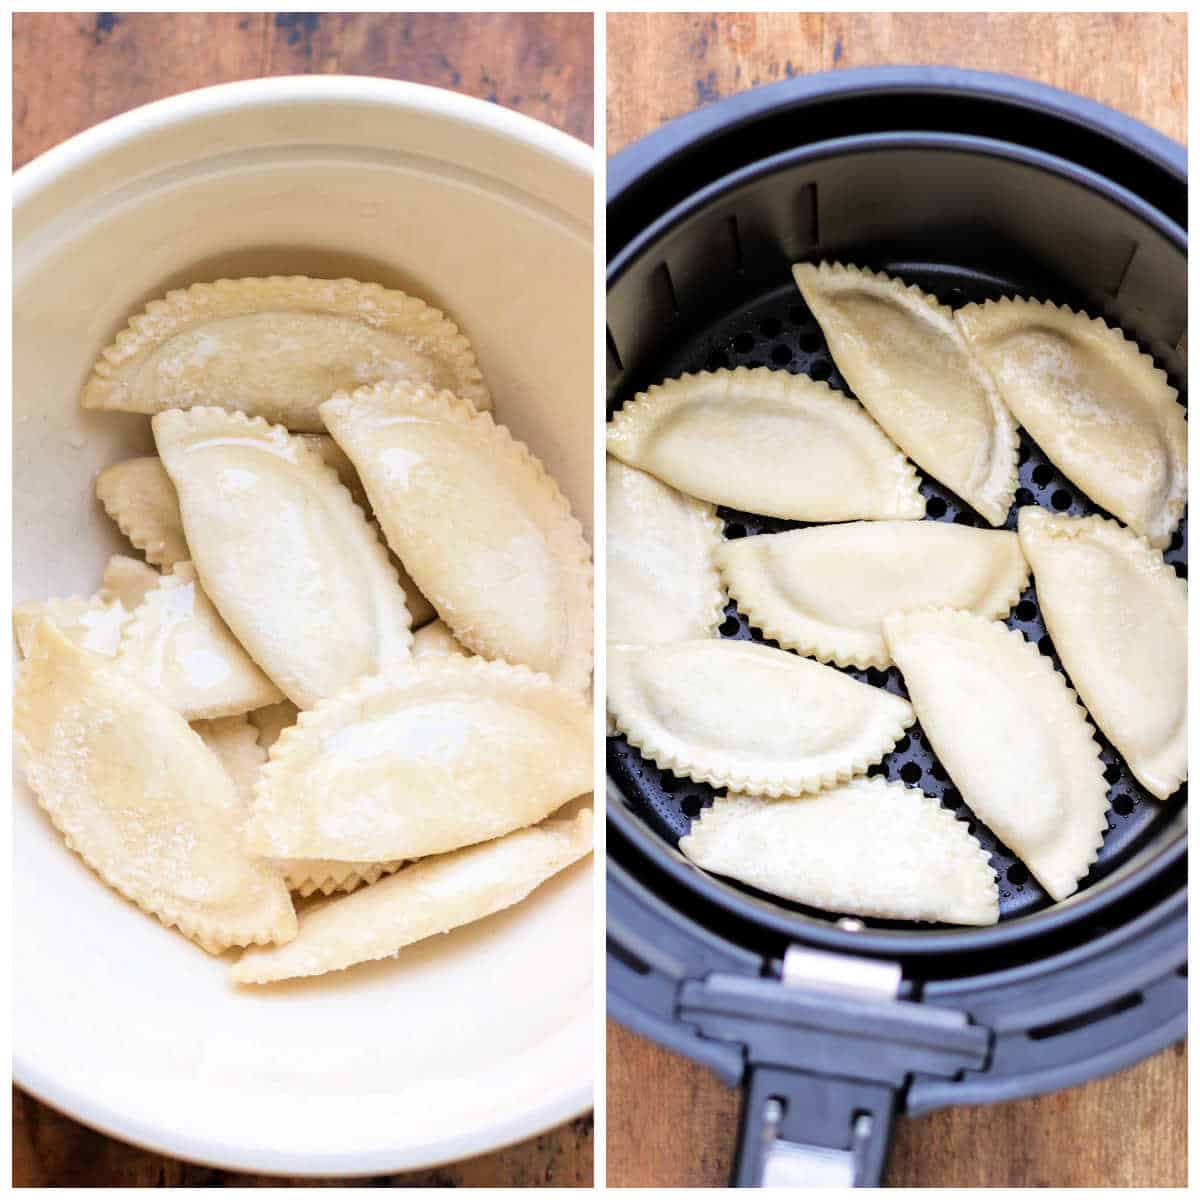 Pierogies in a bowl and in the air fryer.